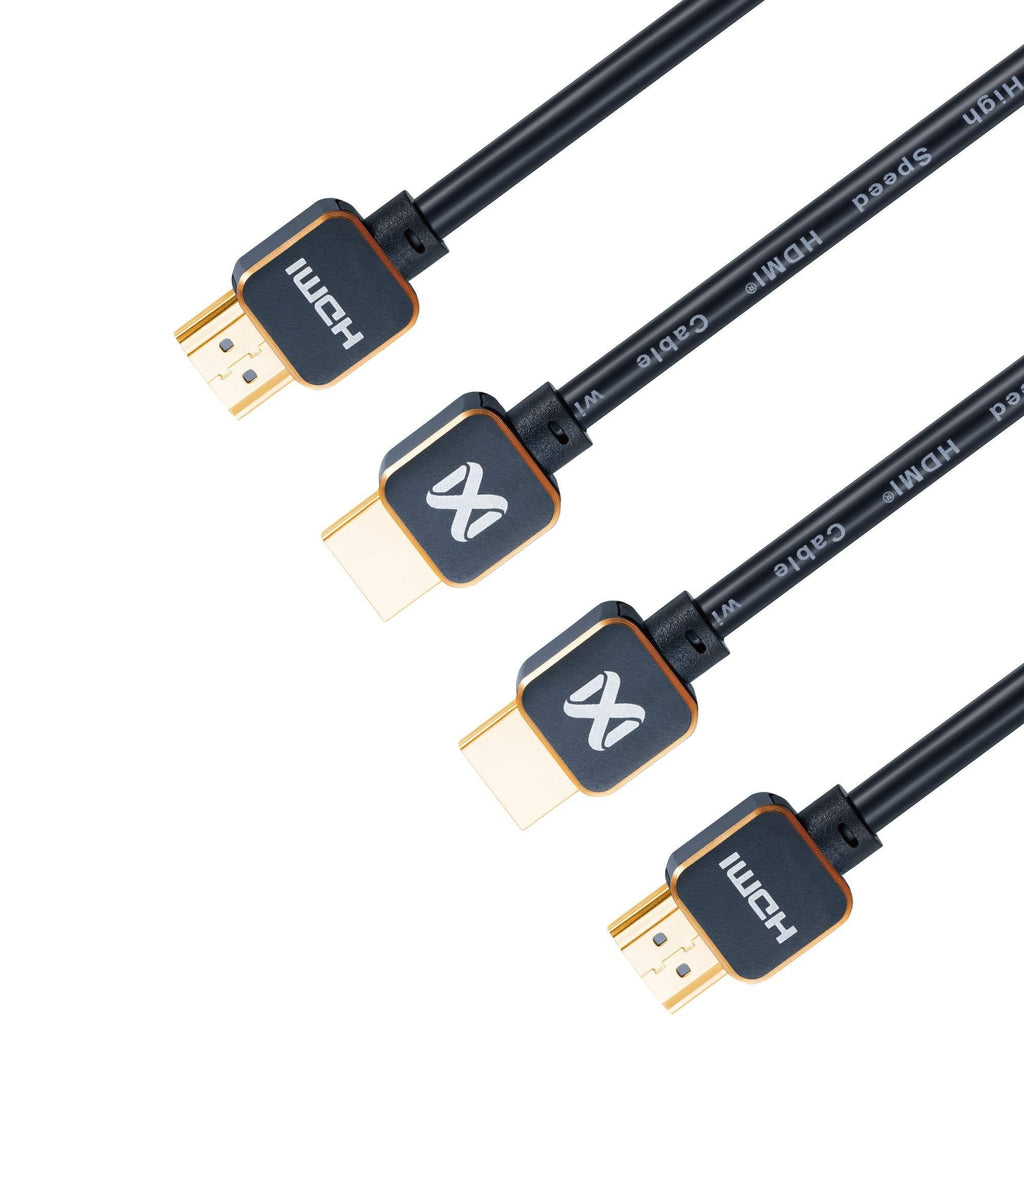 JAVEX [2 Pack] Pure Copper HDMI Cable, Compact Metal Connector, 4K@60Hz 18Gpbs, 1.8M(6FT)+ 3M(10FT) 6FT+10FT